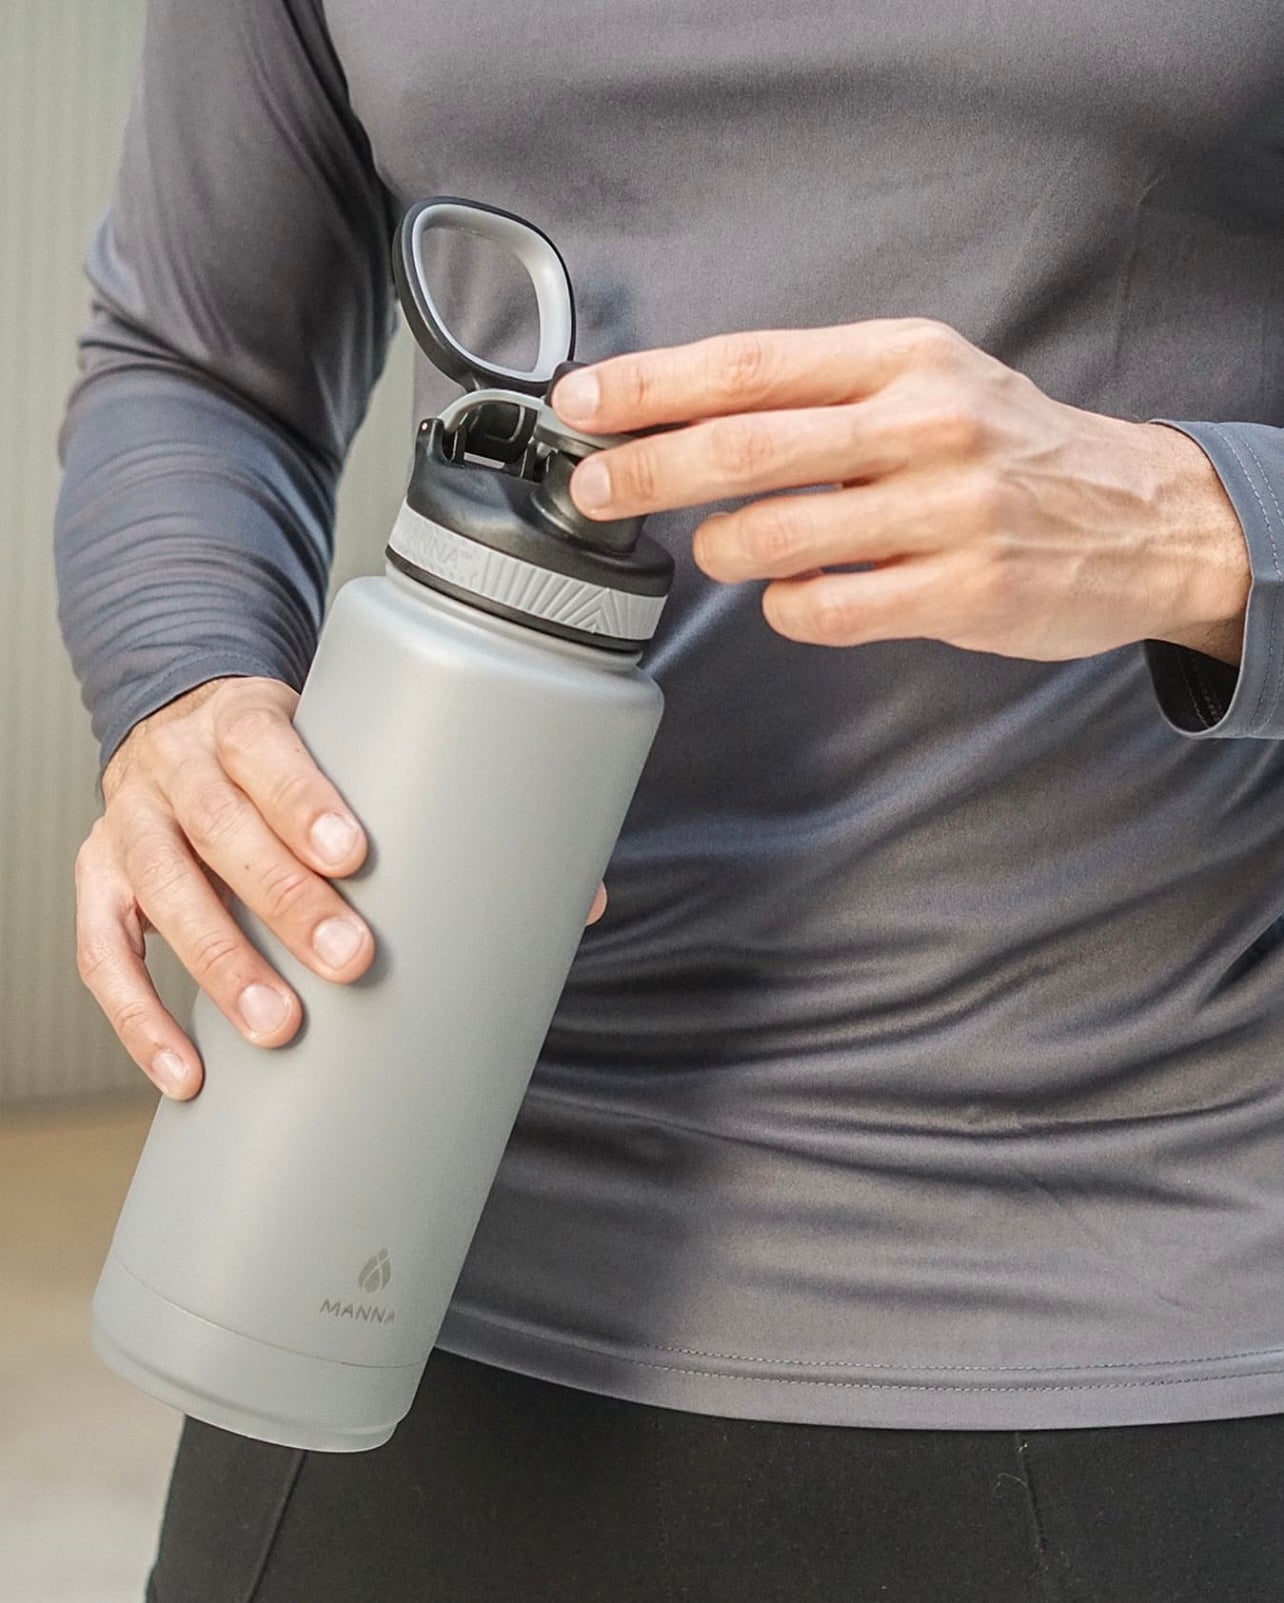 Manna 40-fl oz Stainless Steel Insulated Water Bottle at